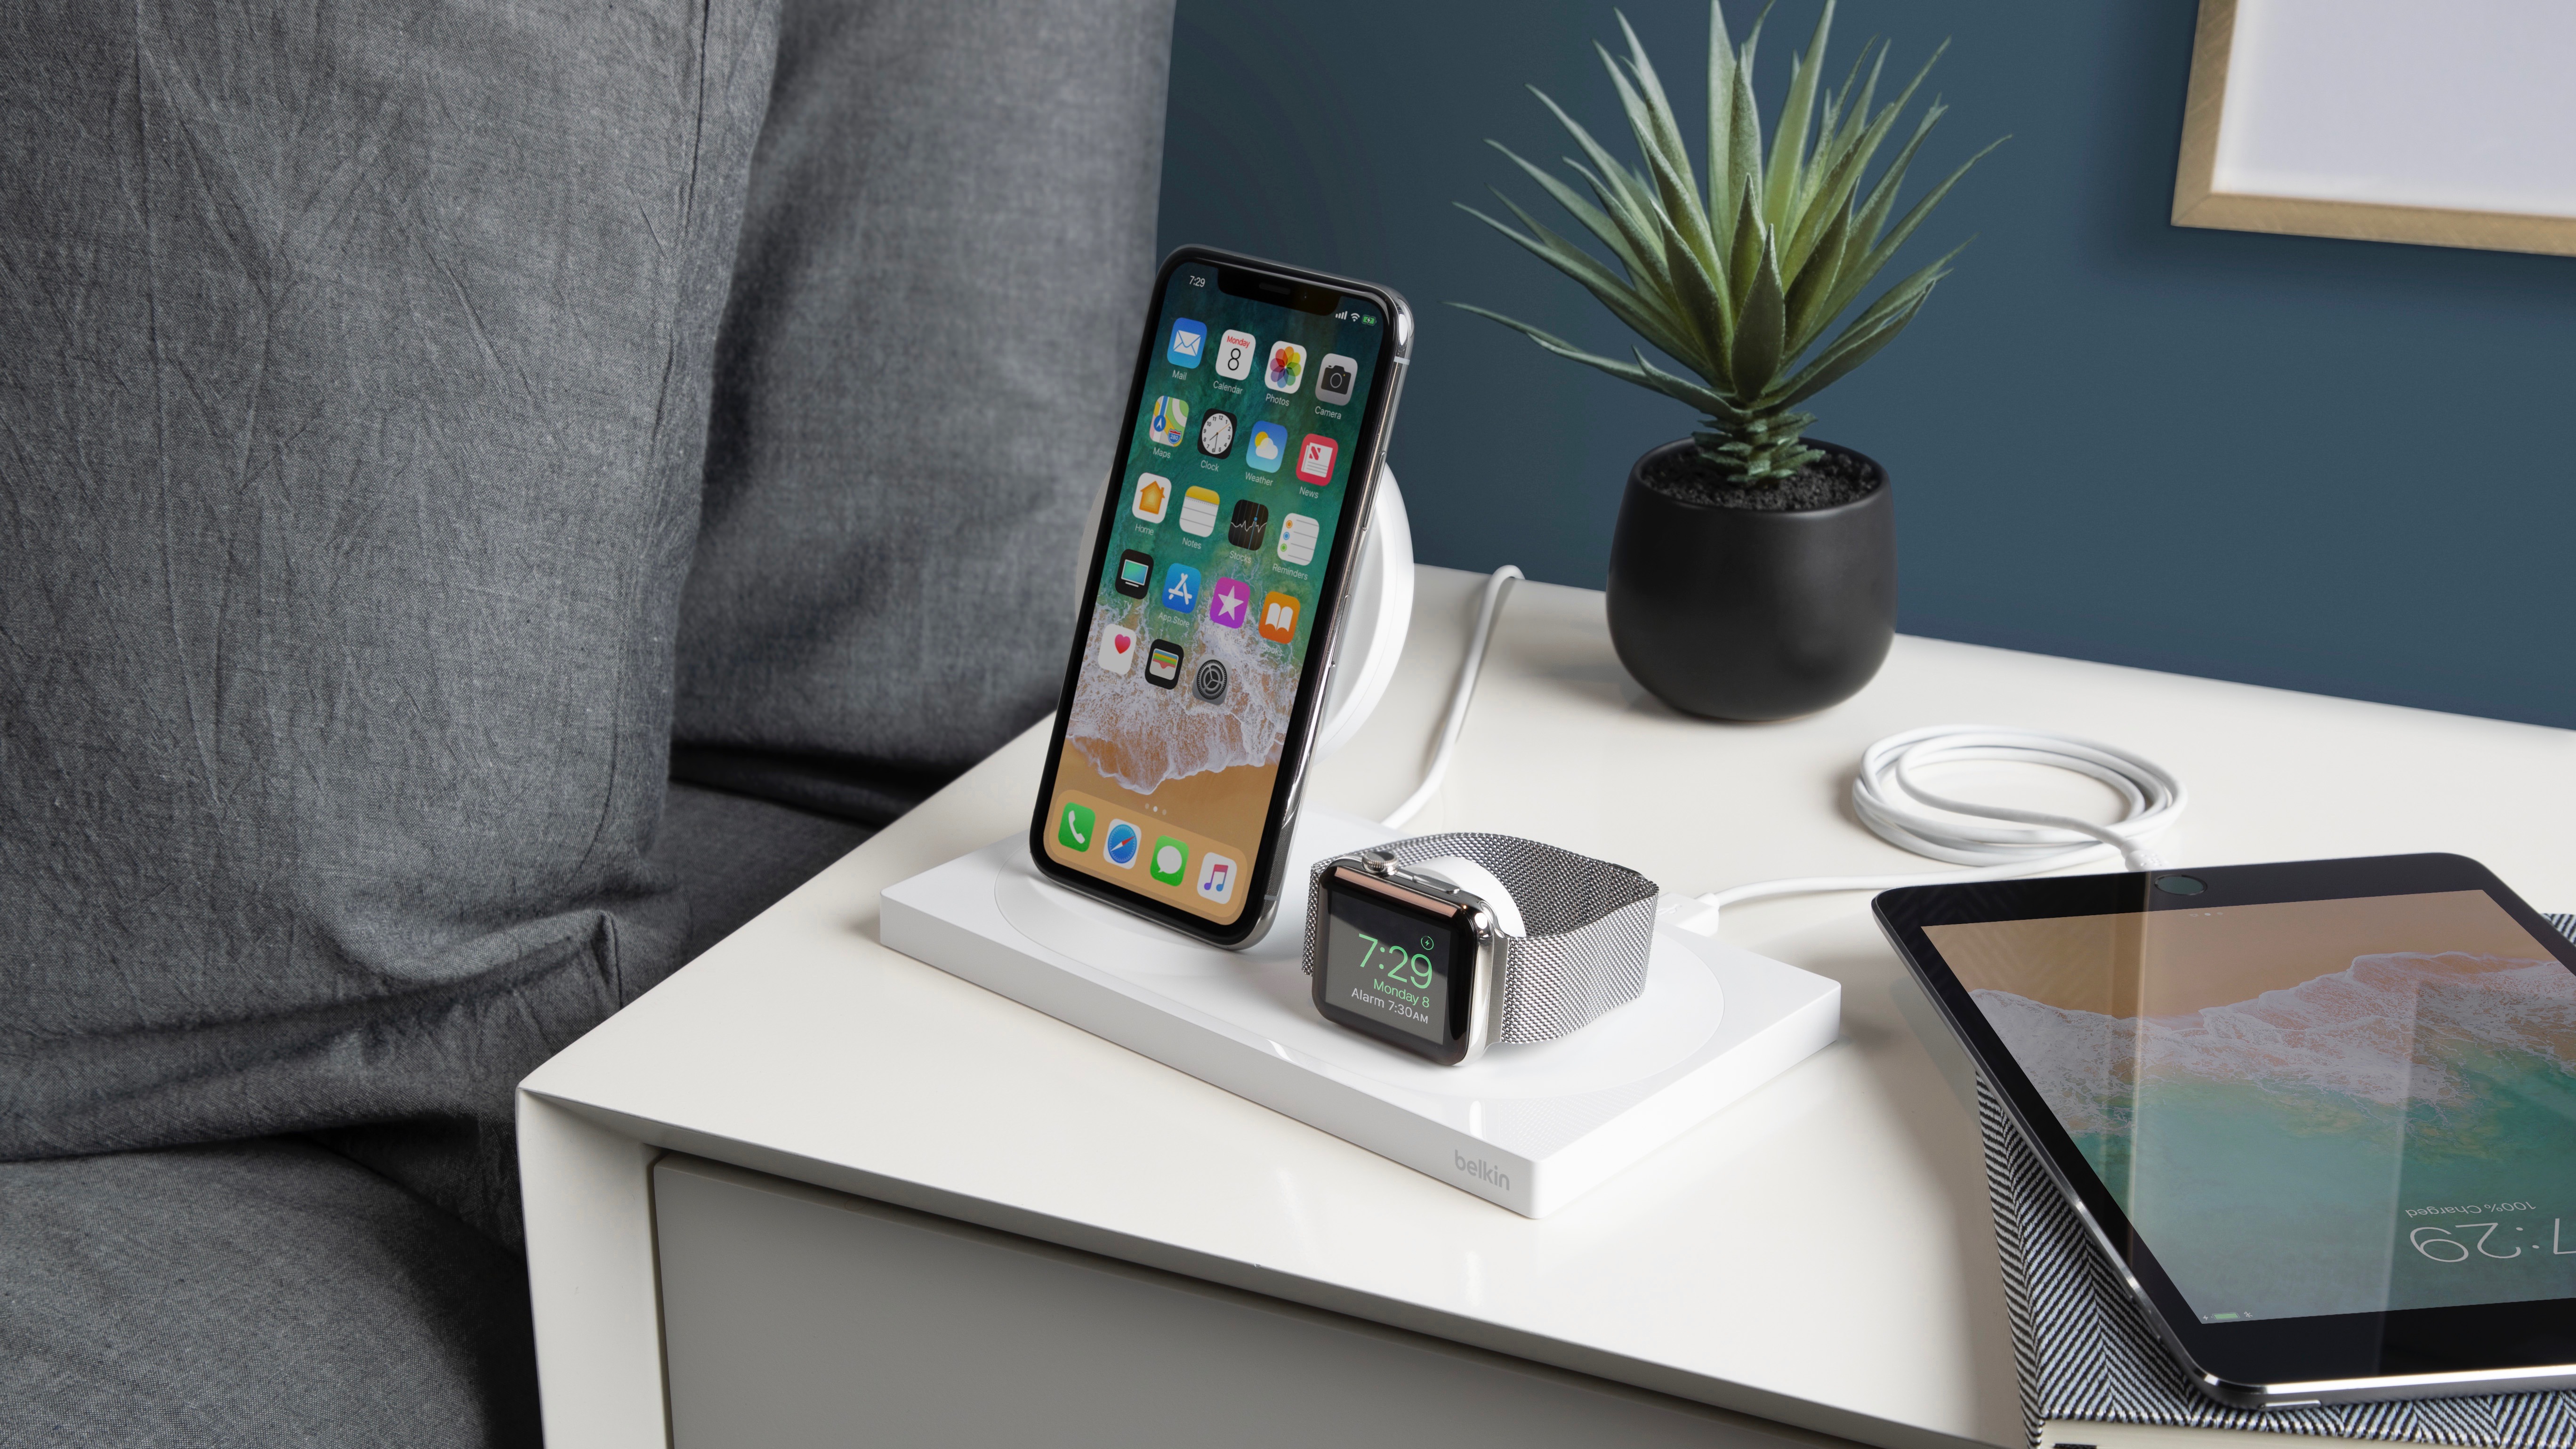 Belkin unveils BOOST UP Wireless Charging Dock for iPhone + Apple Watch  with clean design - 9to5Mac